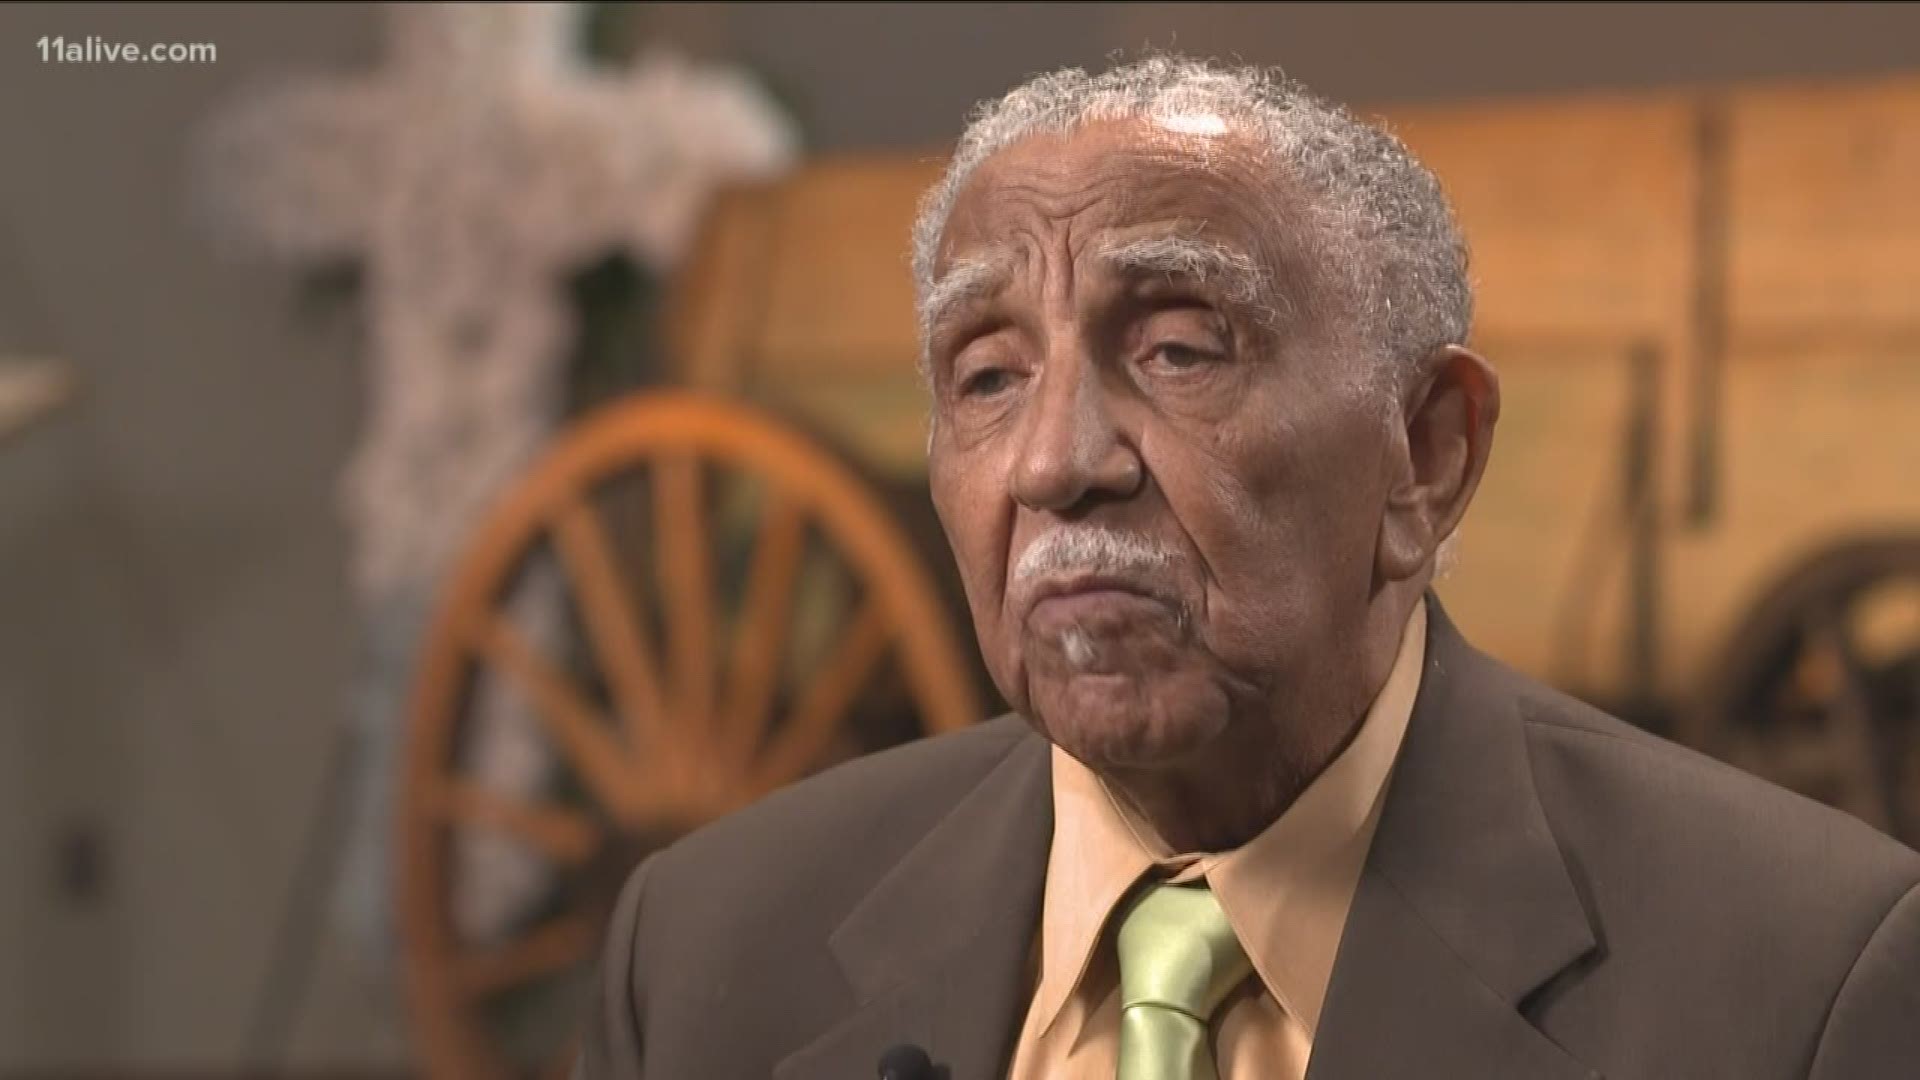 In honoring the Rev. Joseph Lowery's memory, we're also remembering his message.